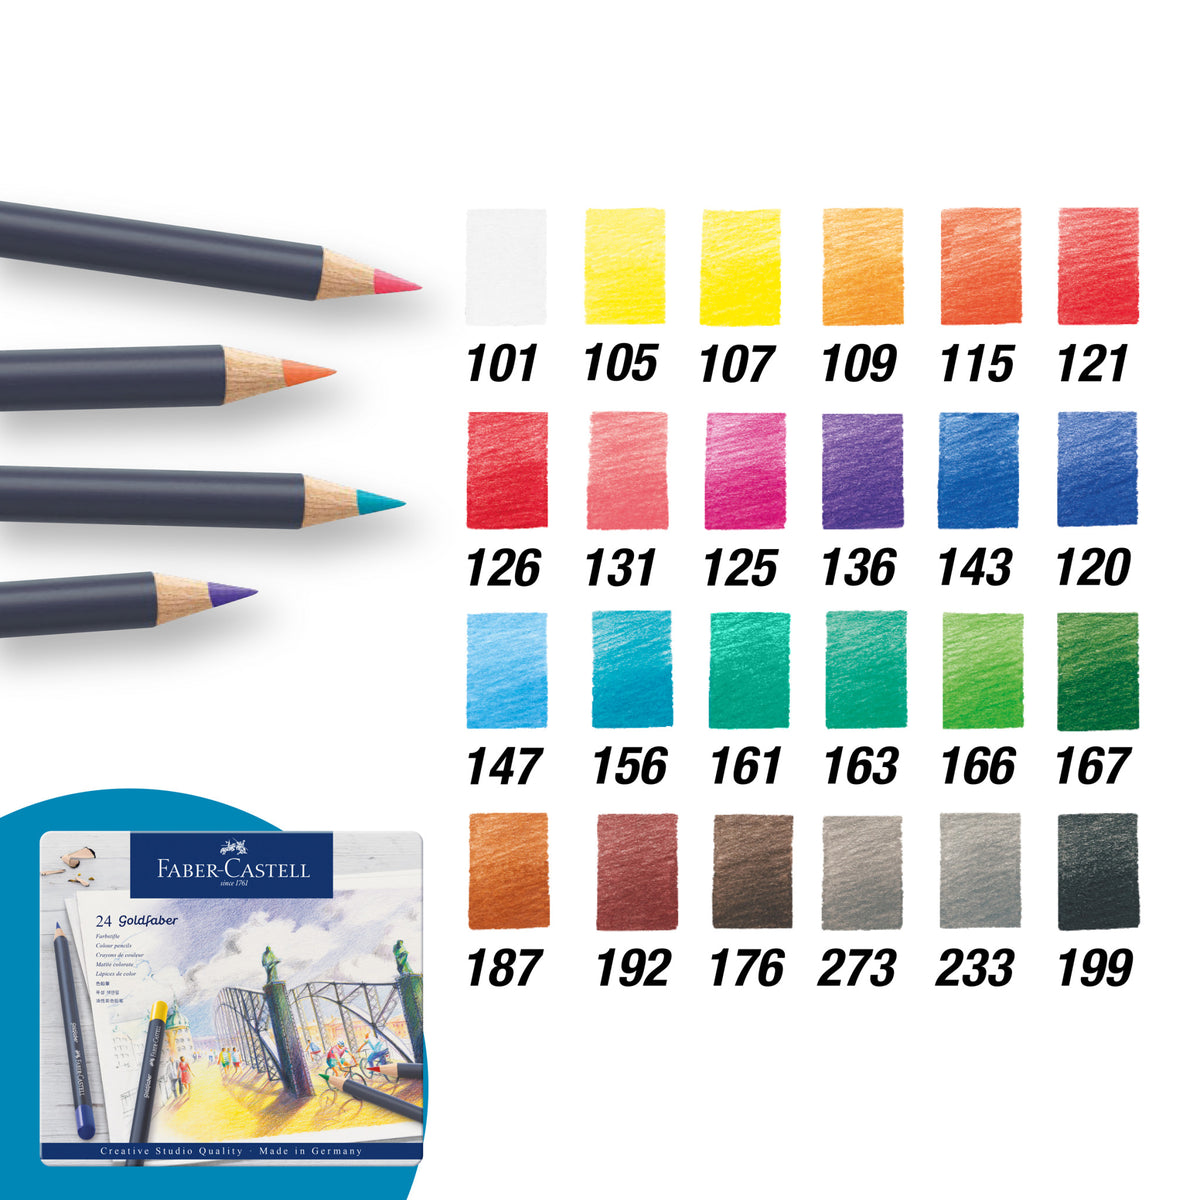 Are you looking for an Goldfaber Color Pencils - Tin of 24 - #214724  Faber-Castell to buy? Get it done now